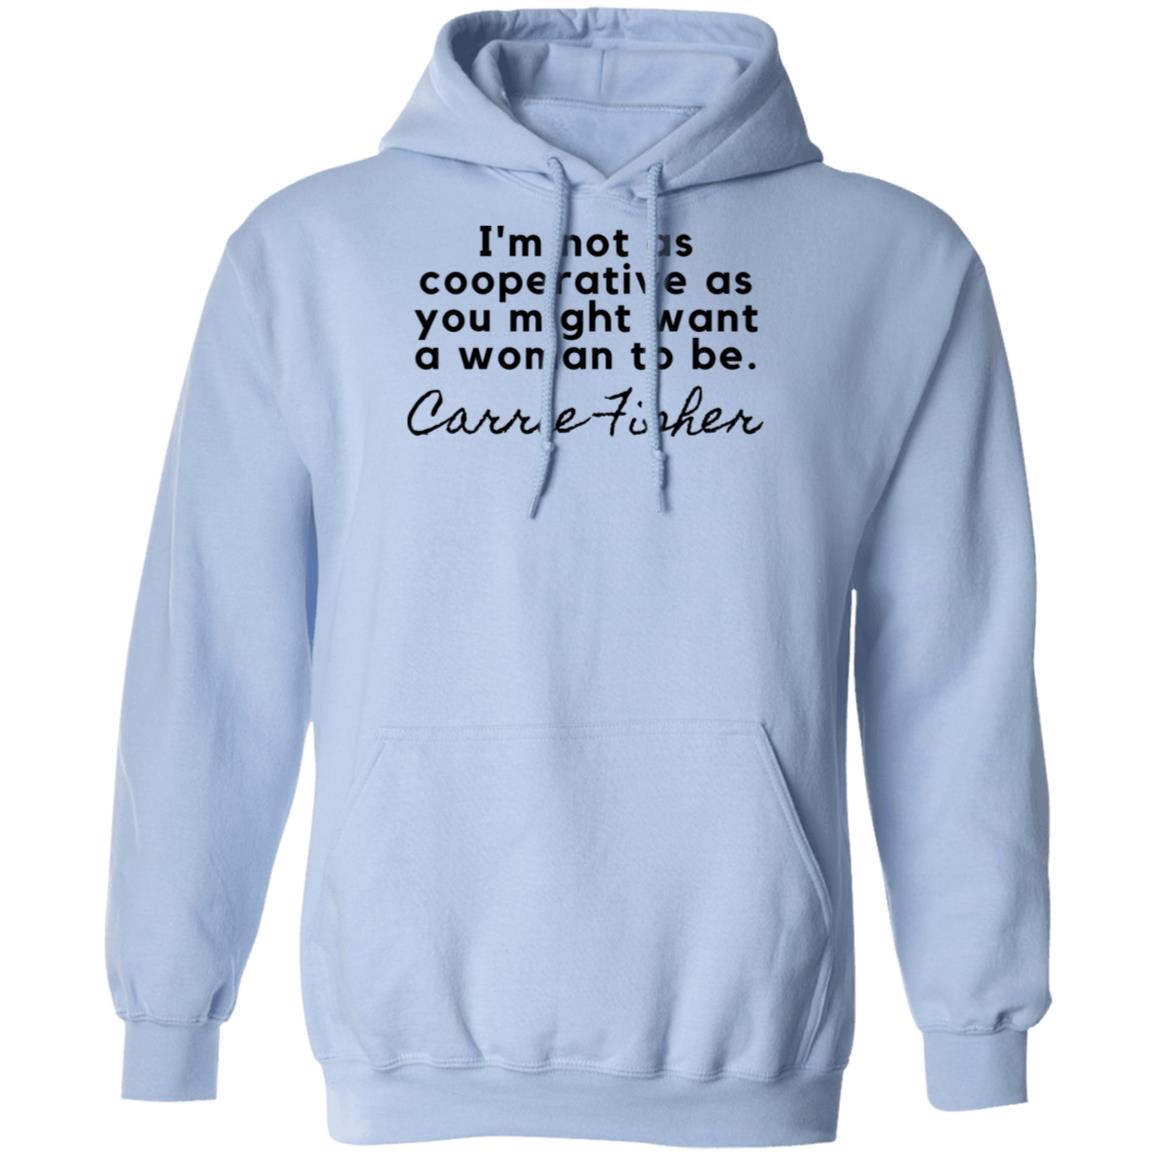 Carrie Fisher Cooperative Woman Quote Hooded Sweatshirt